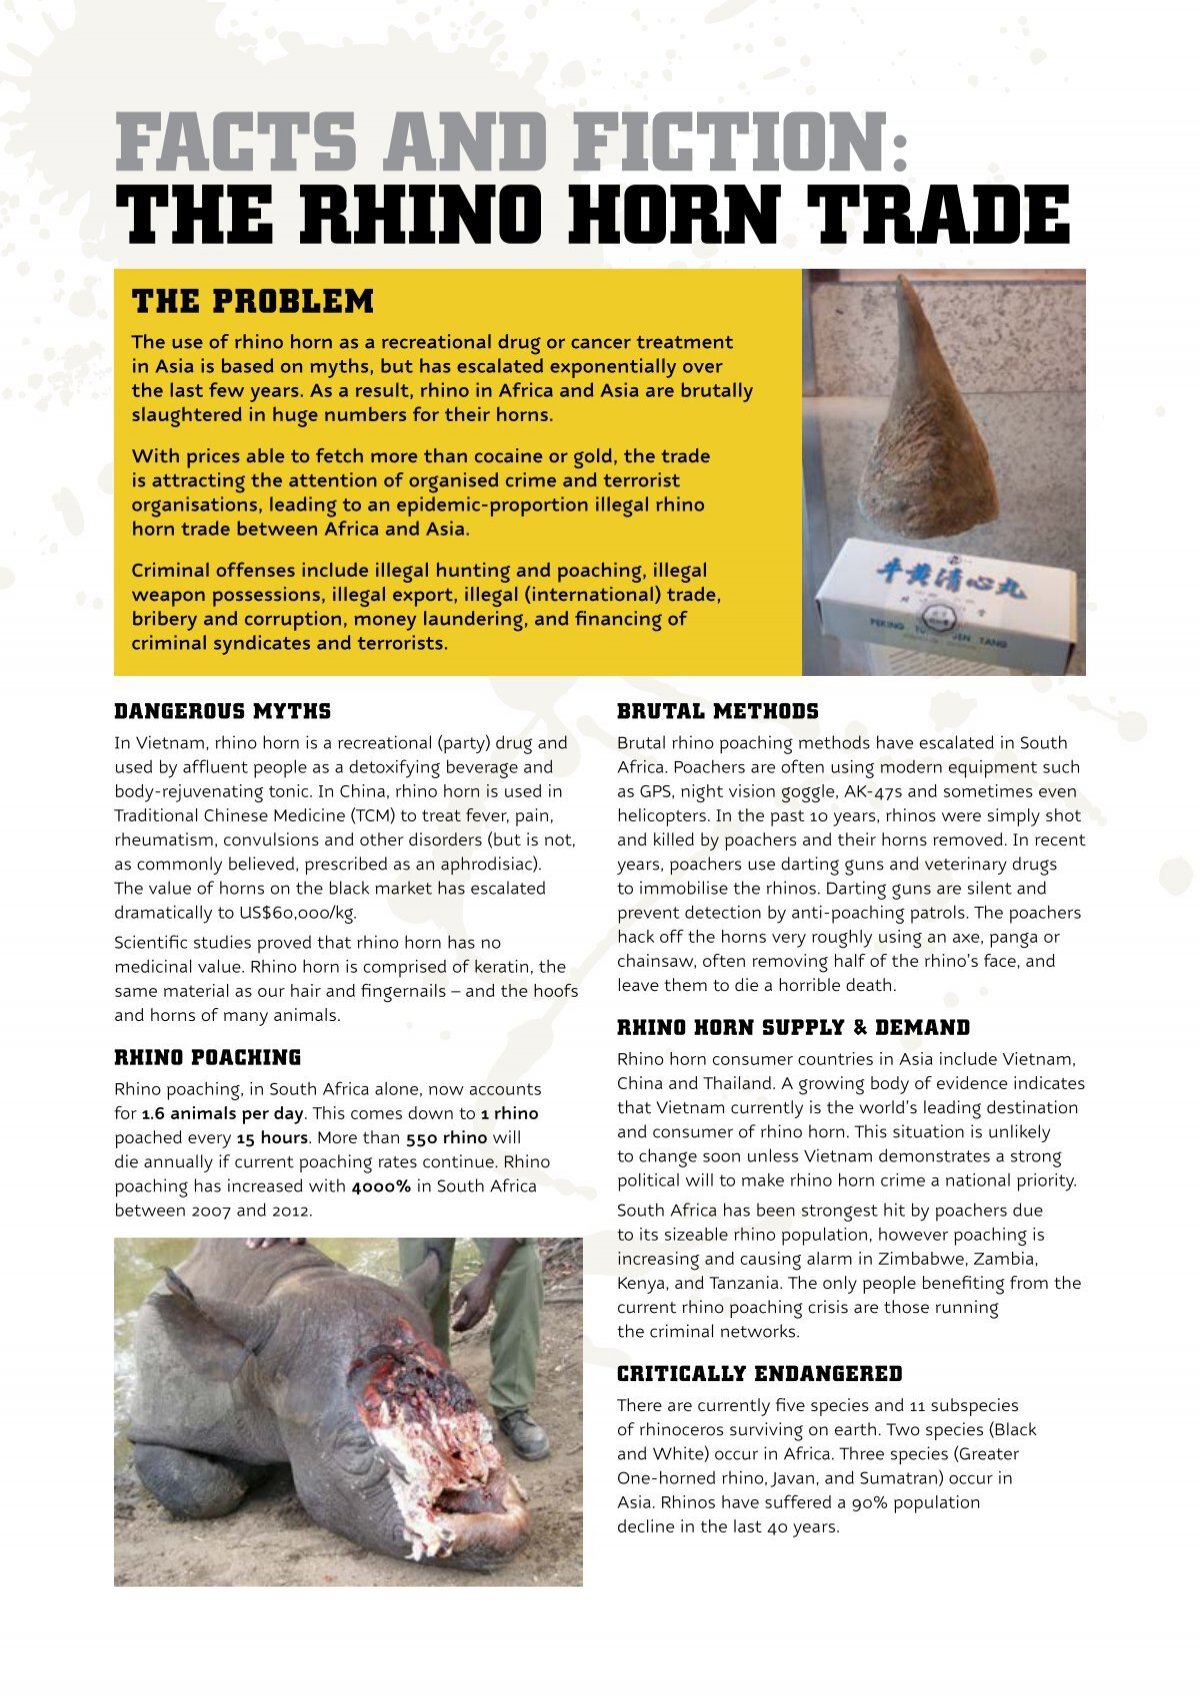 Briefing Paper: Analysis of Raw Rhino Horn Prices in Africa and Asia